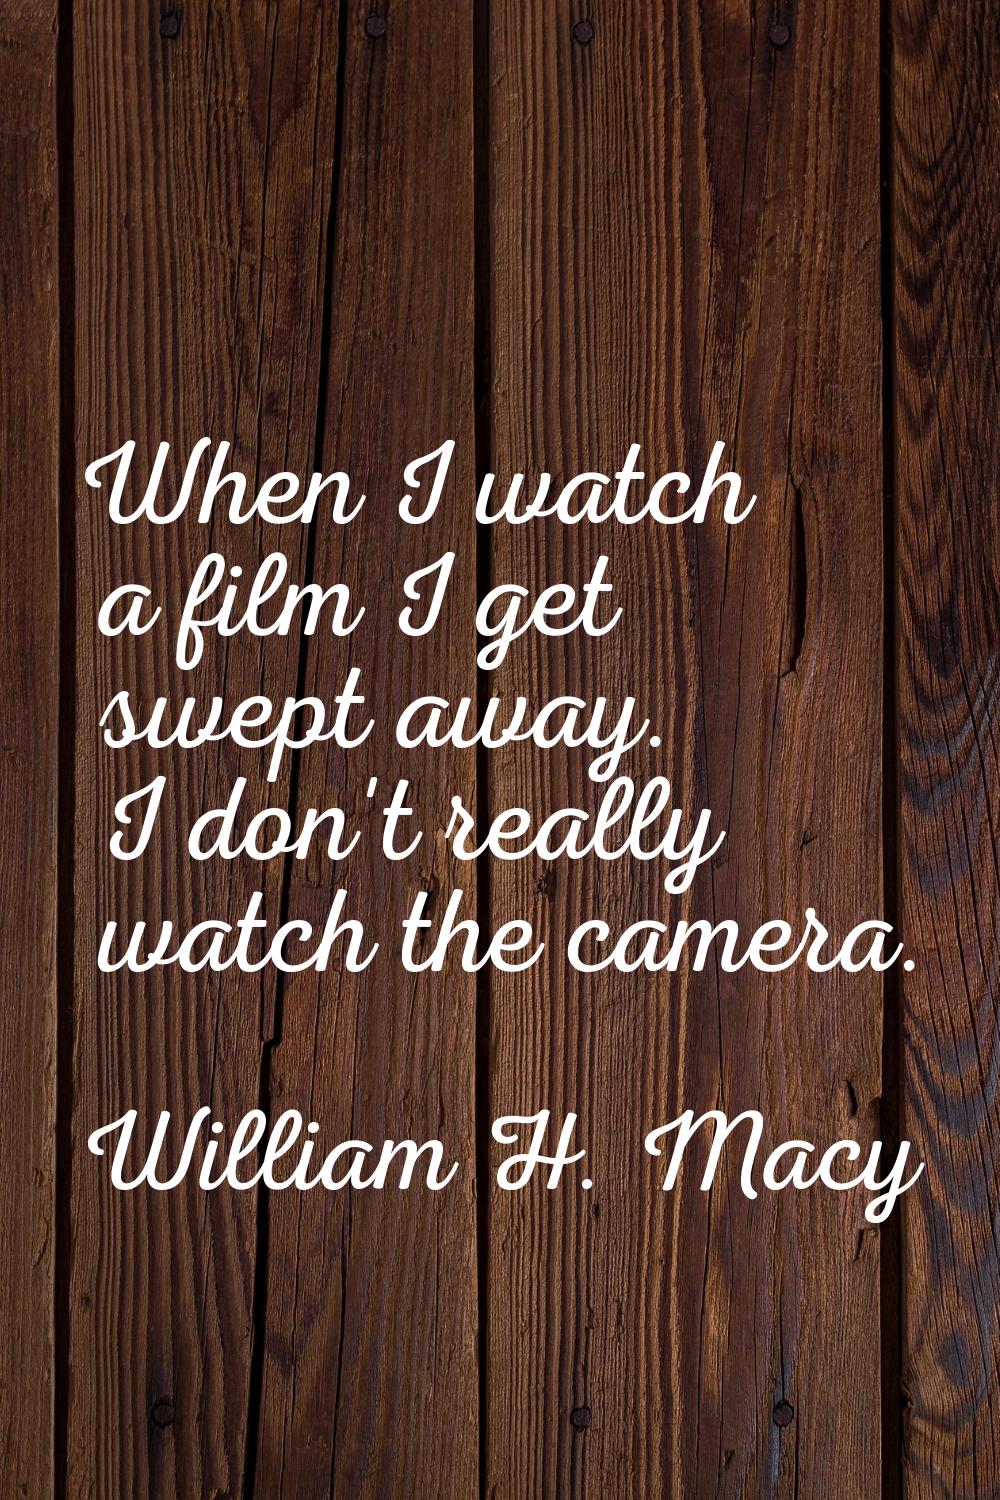 When I watch a film I get swept away. I don't really watch the camera.